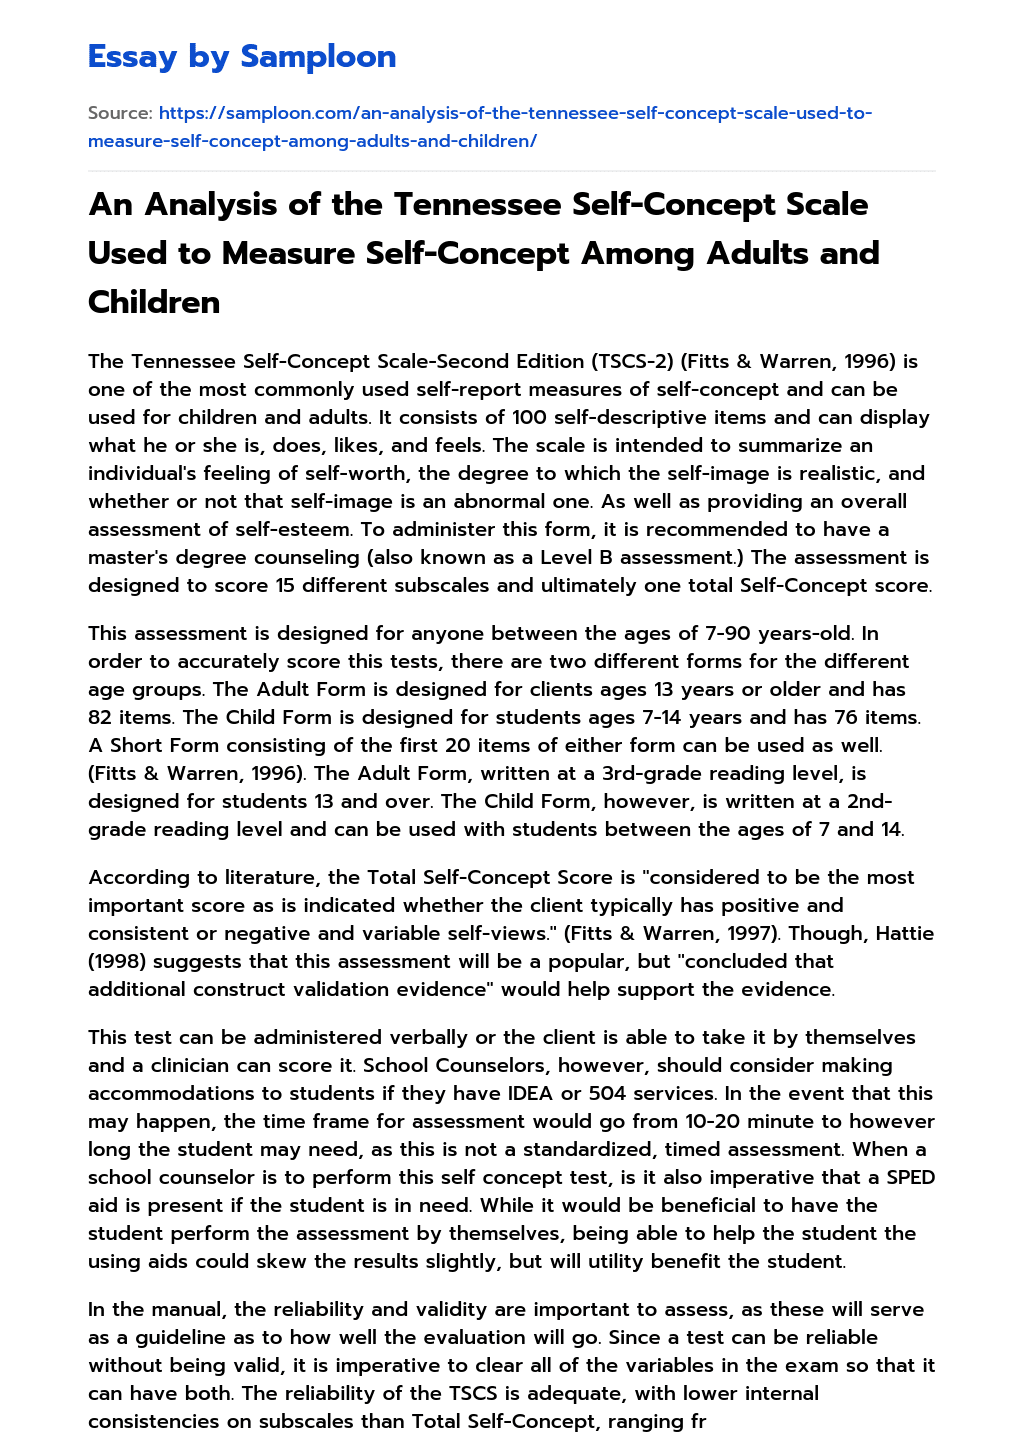 An Analysis of the Tennessee Self-Concept Scale Used to Measure Self-Concept Among Adults and Children essay